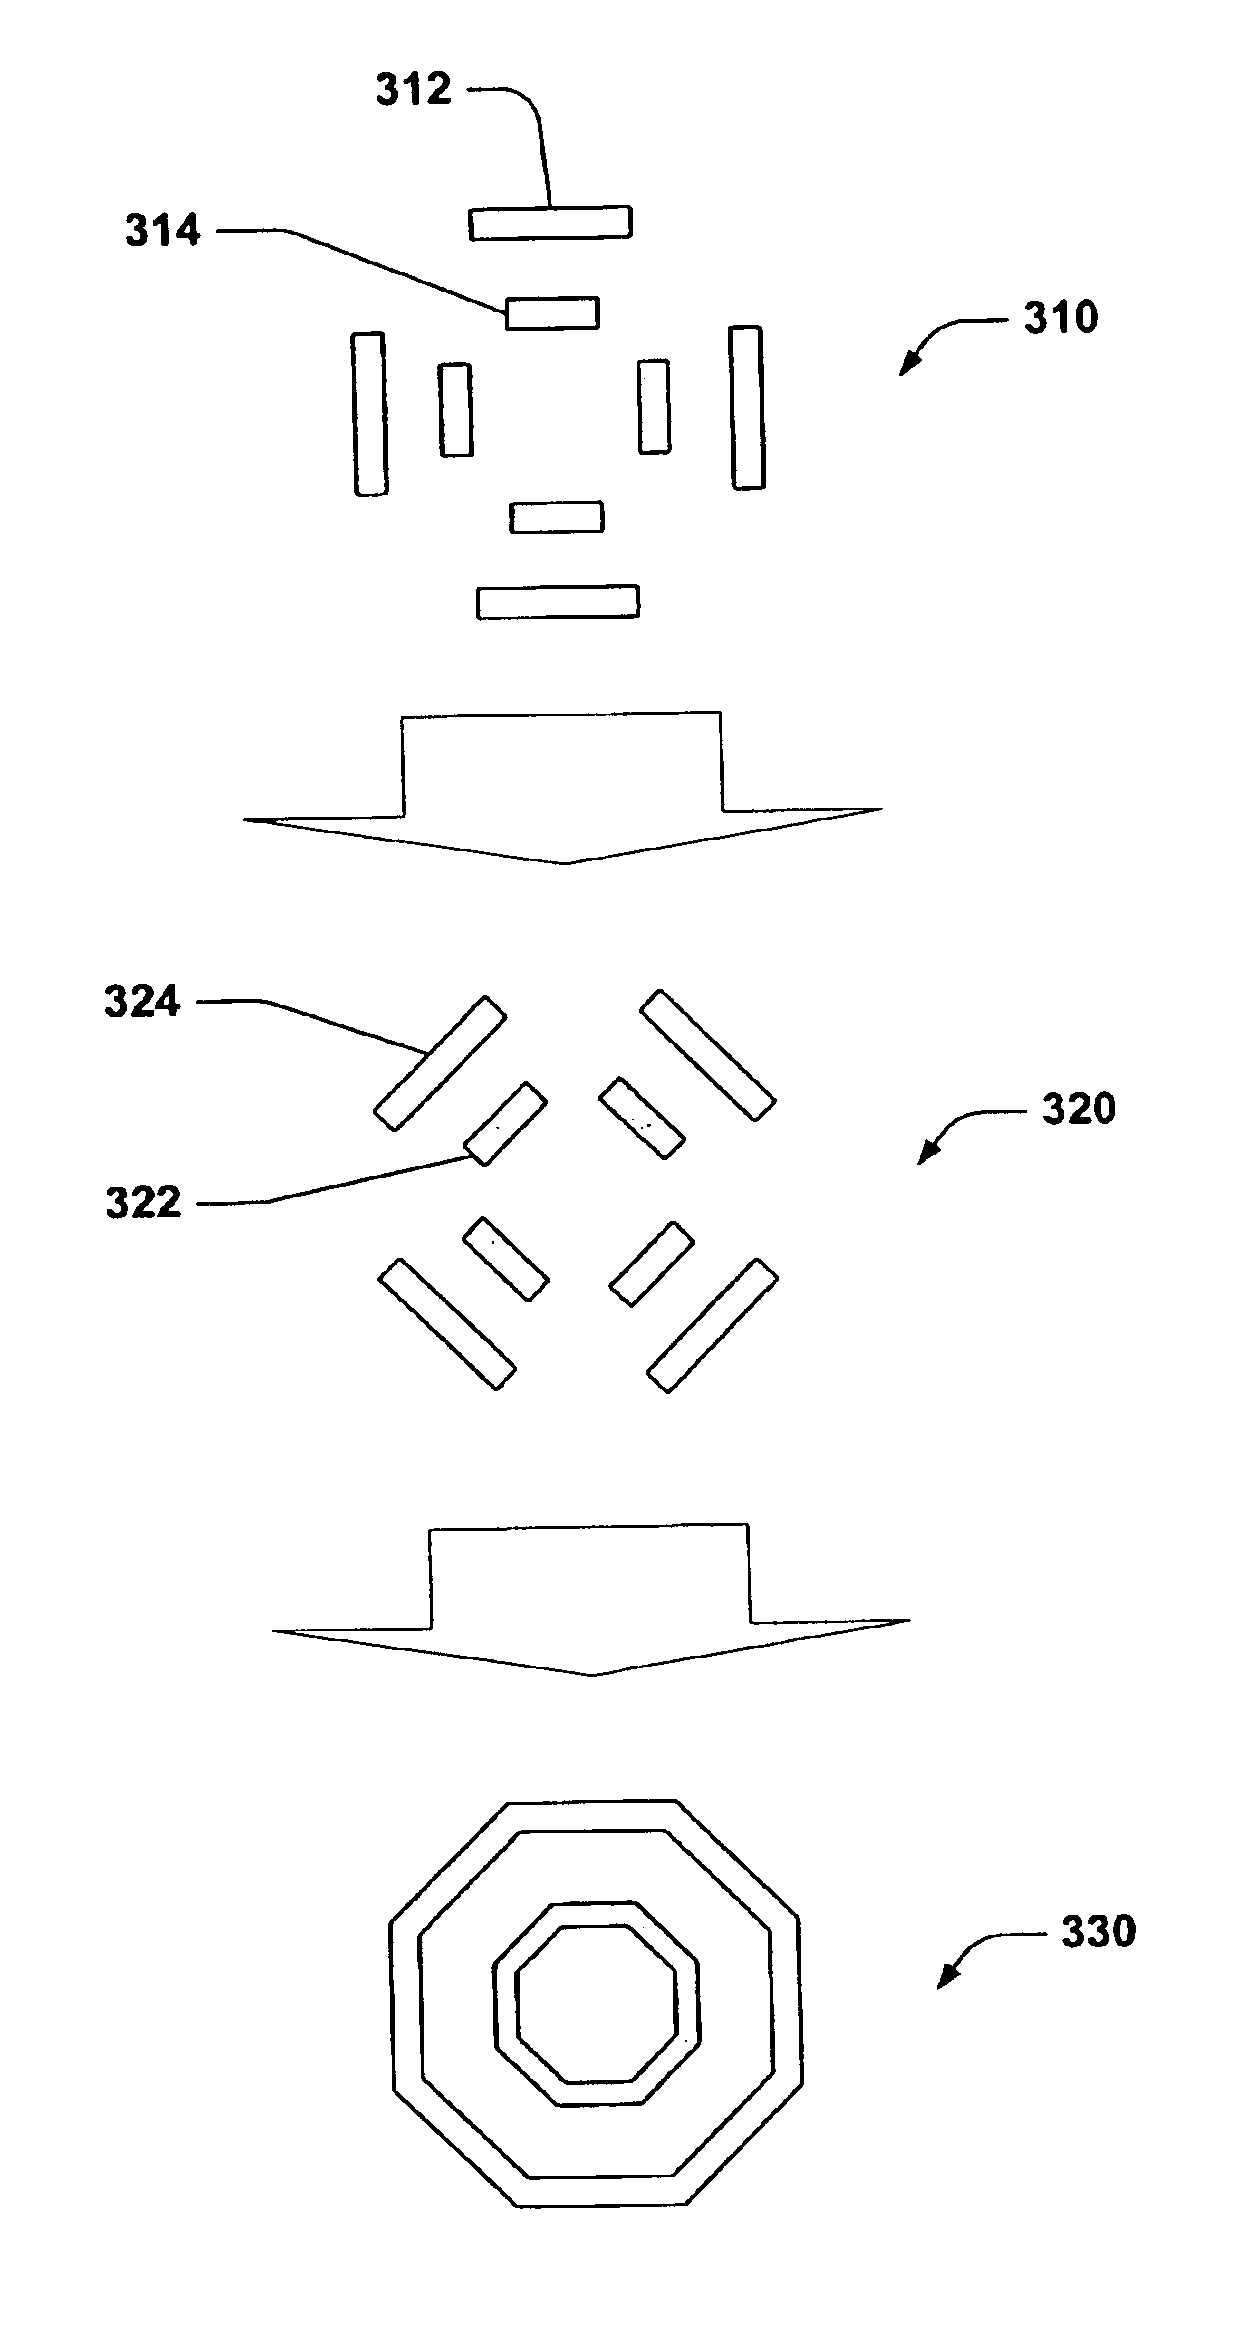 System and method of pattern recognition and metrology structure for an X-initiative layout design